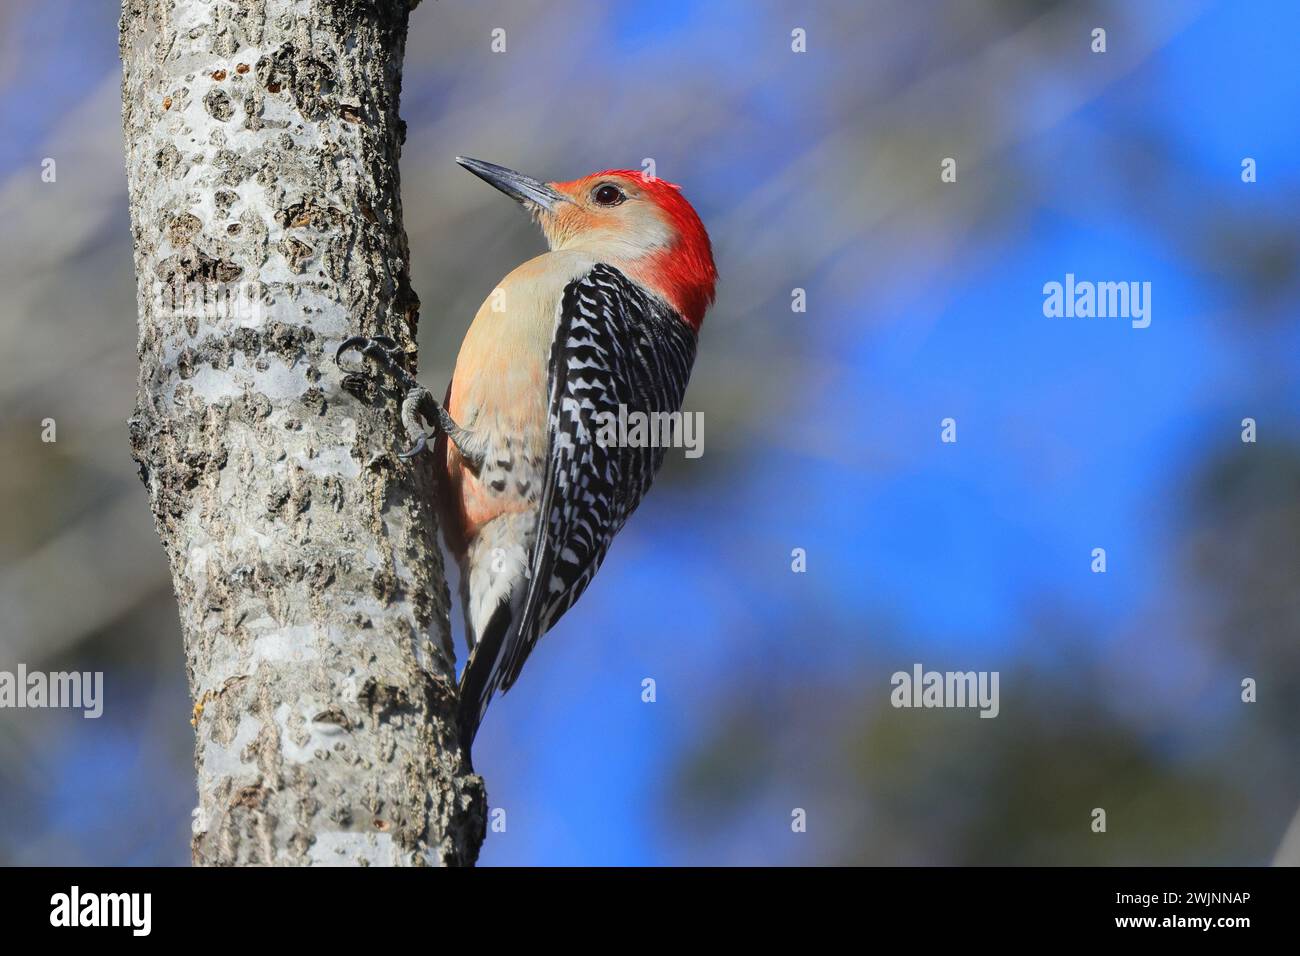 A Red-headed woodpecker perched on branch Stock Photo